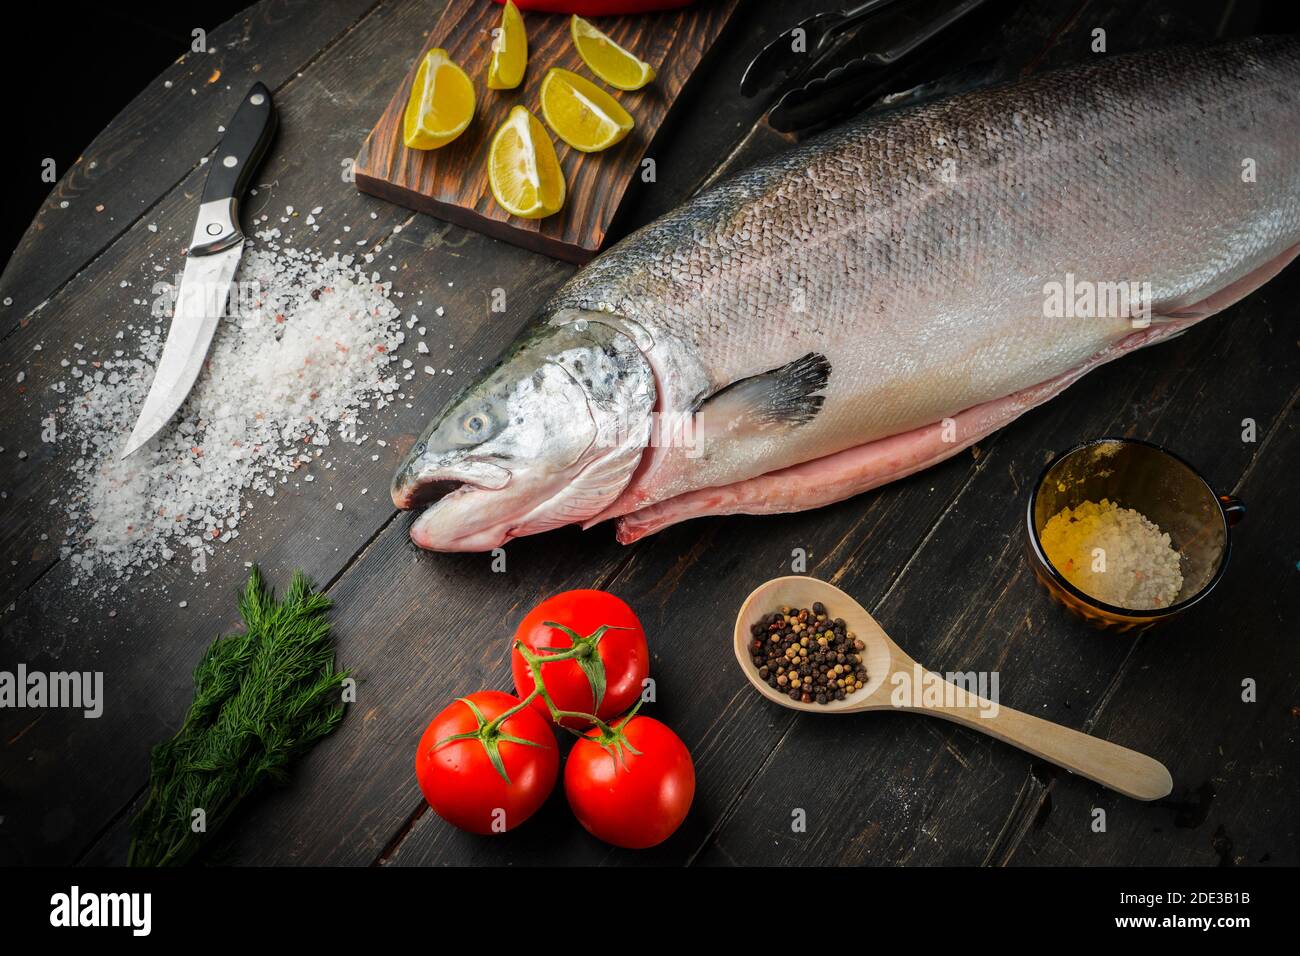 Big fresh salmon with ingredients for cooking on wooden background  Stock Photo